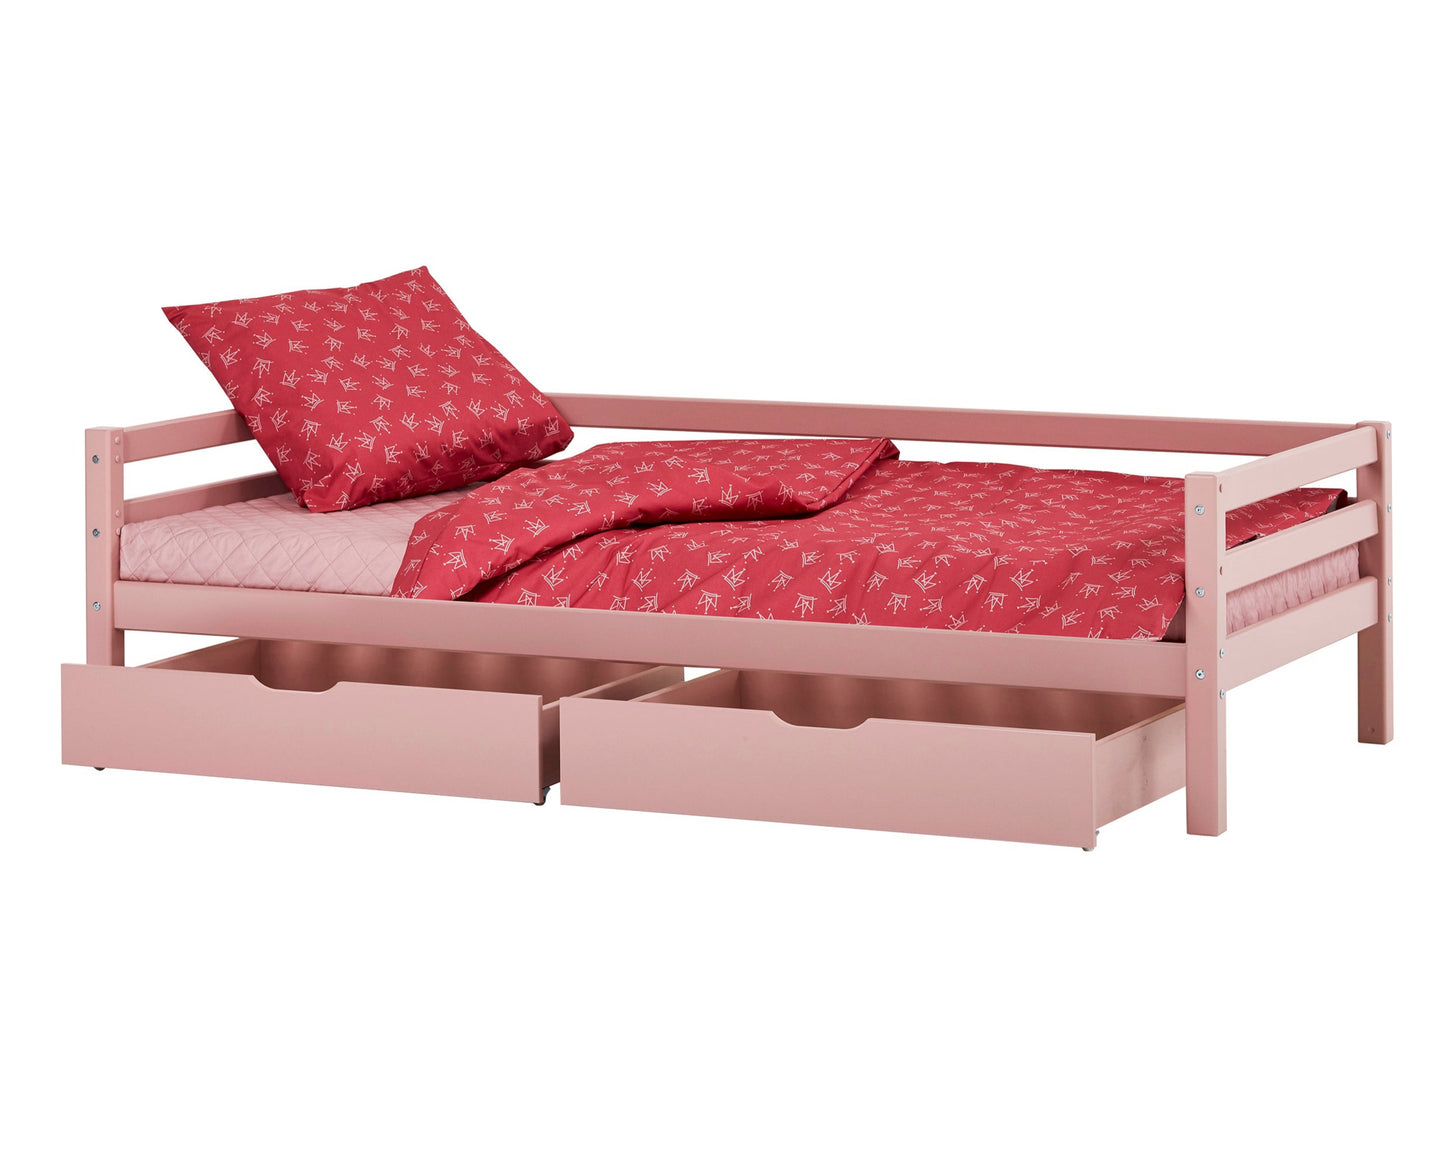 Drawer set for 90x200 cm beds